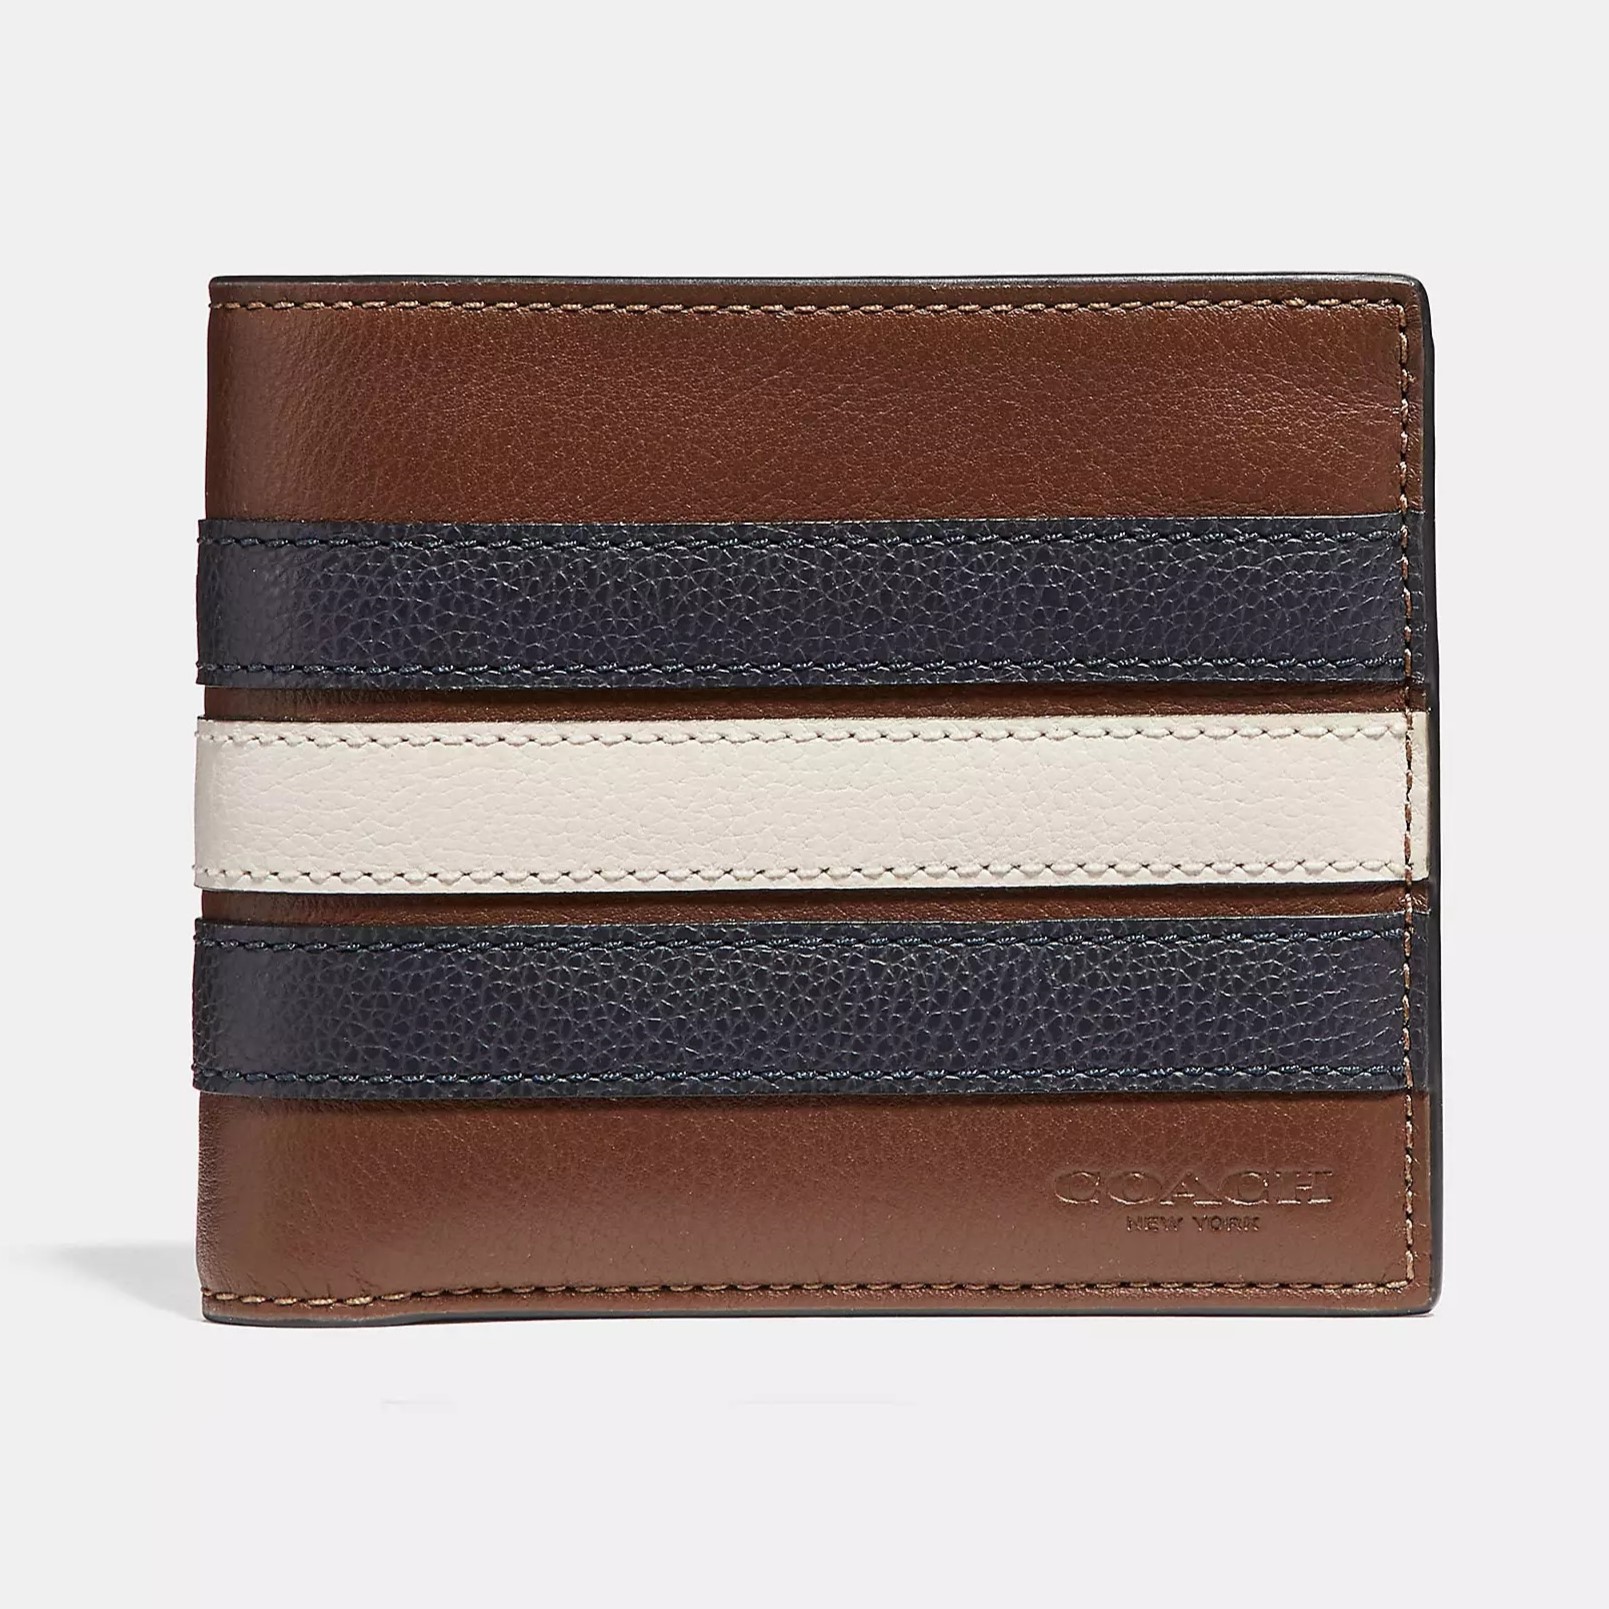 VÍ COACH NAM 3 IN 1 WALLET WITH VARSITY STRIPE SMOOTH CALF LEATHER F24649 2